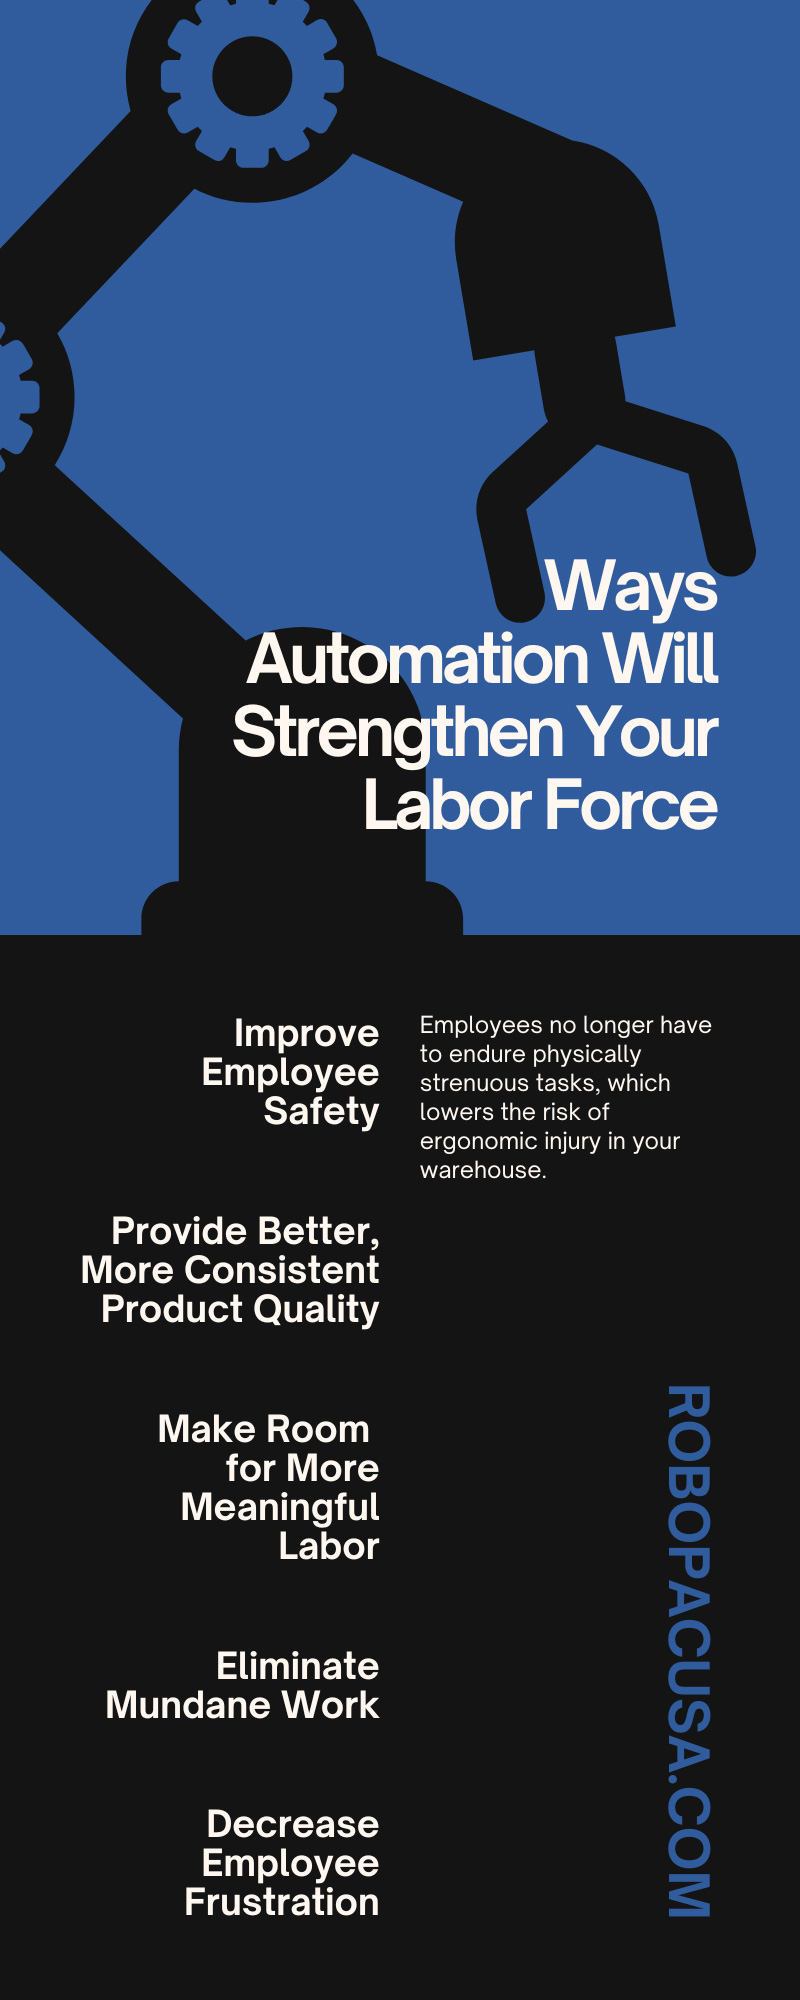 7 Ways Automation Will Strengthen Your Labor Force